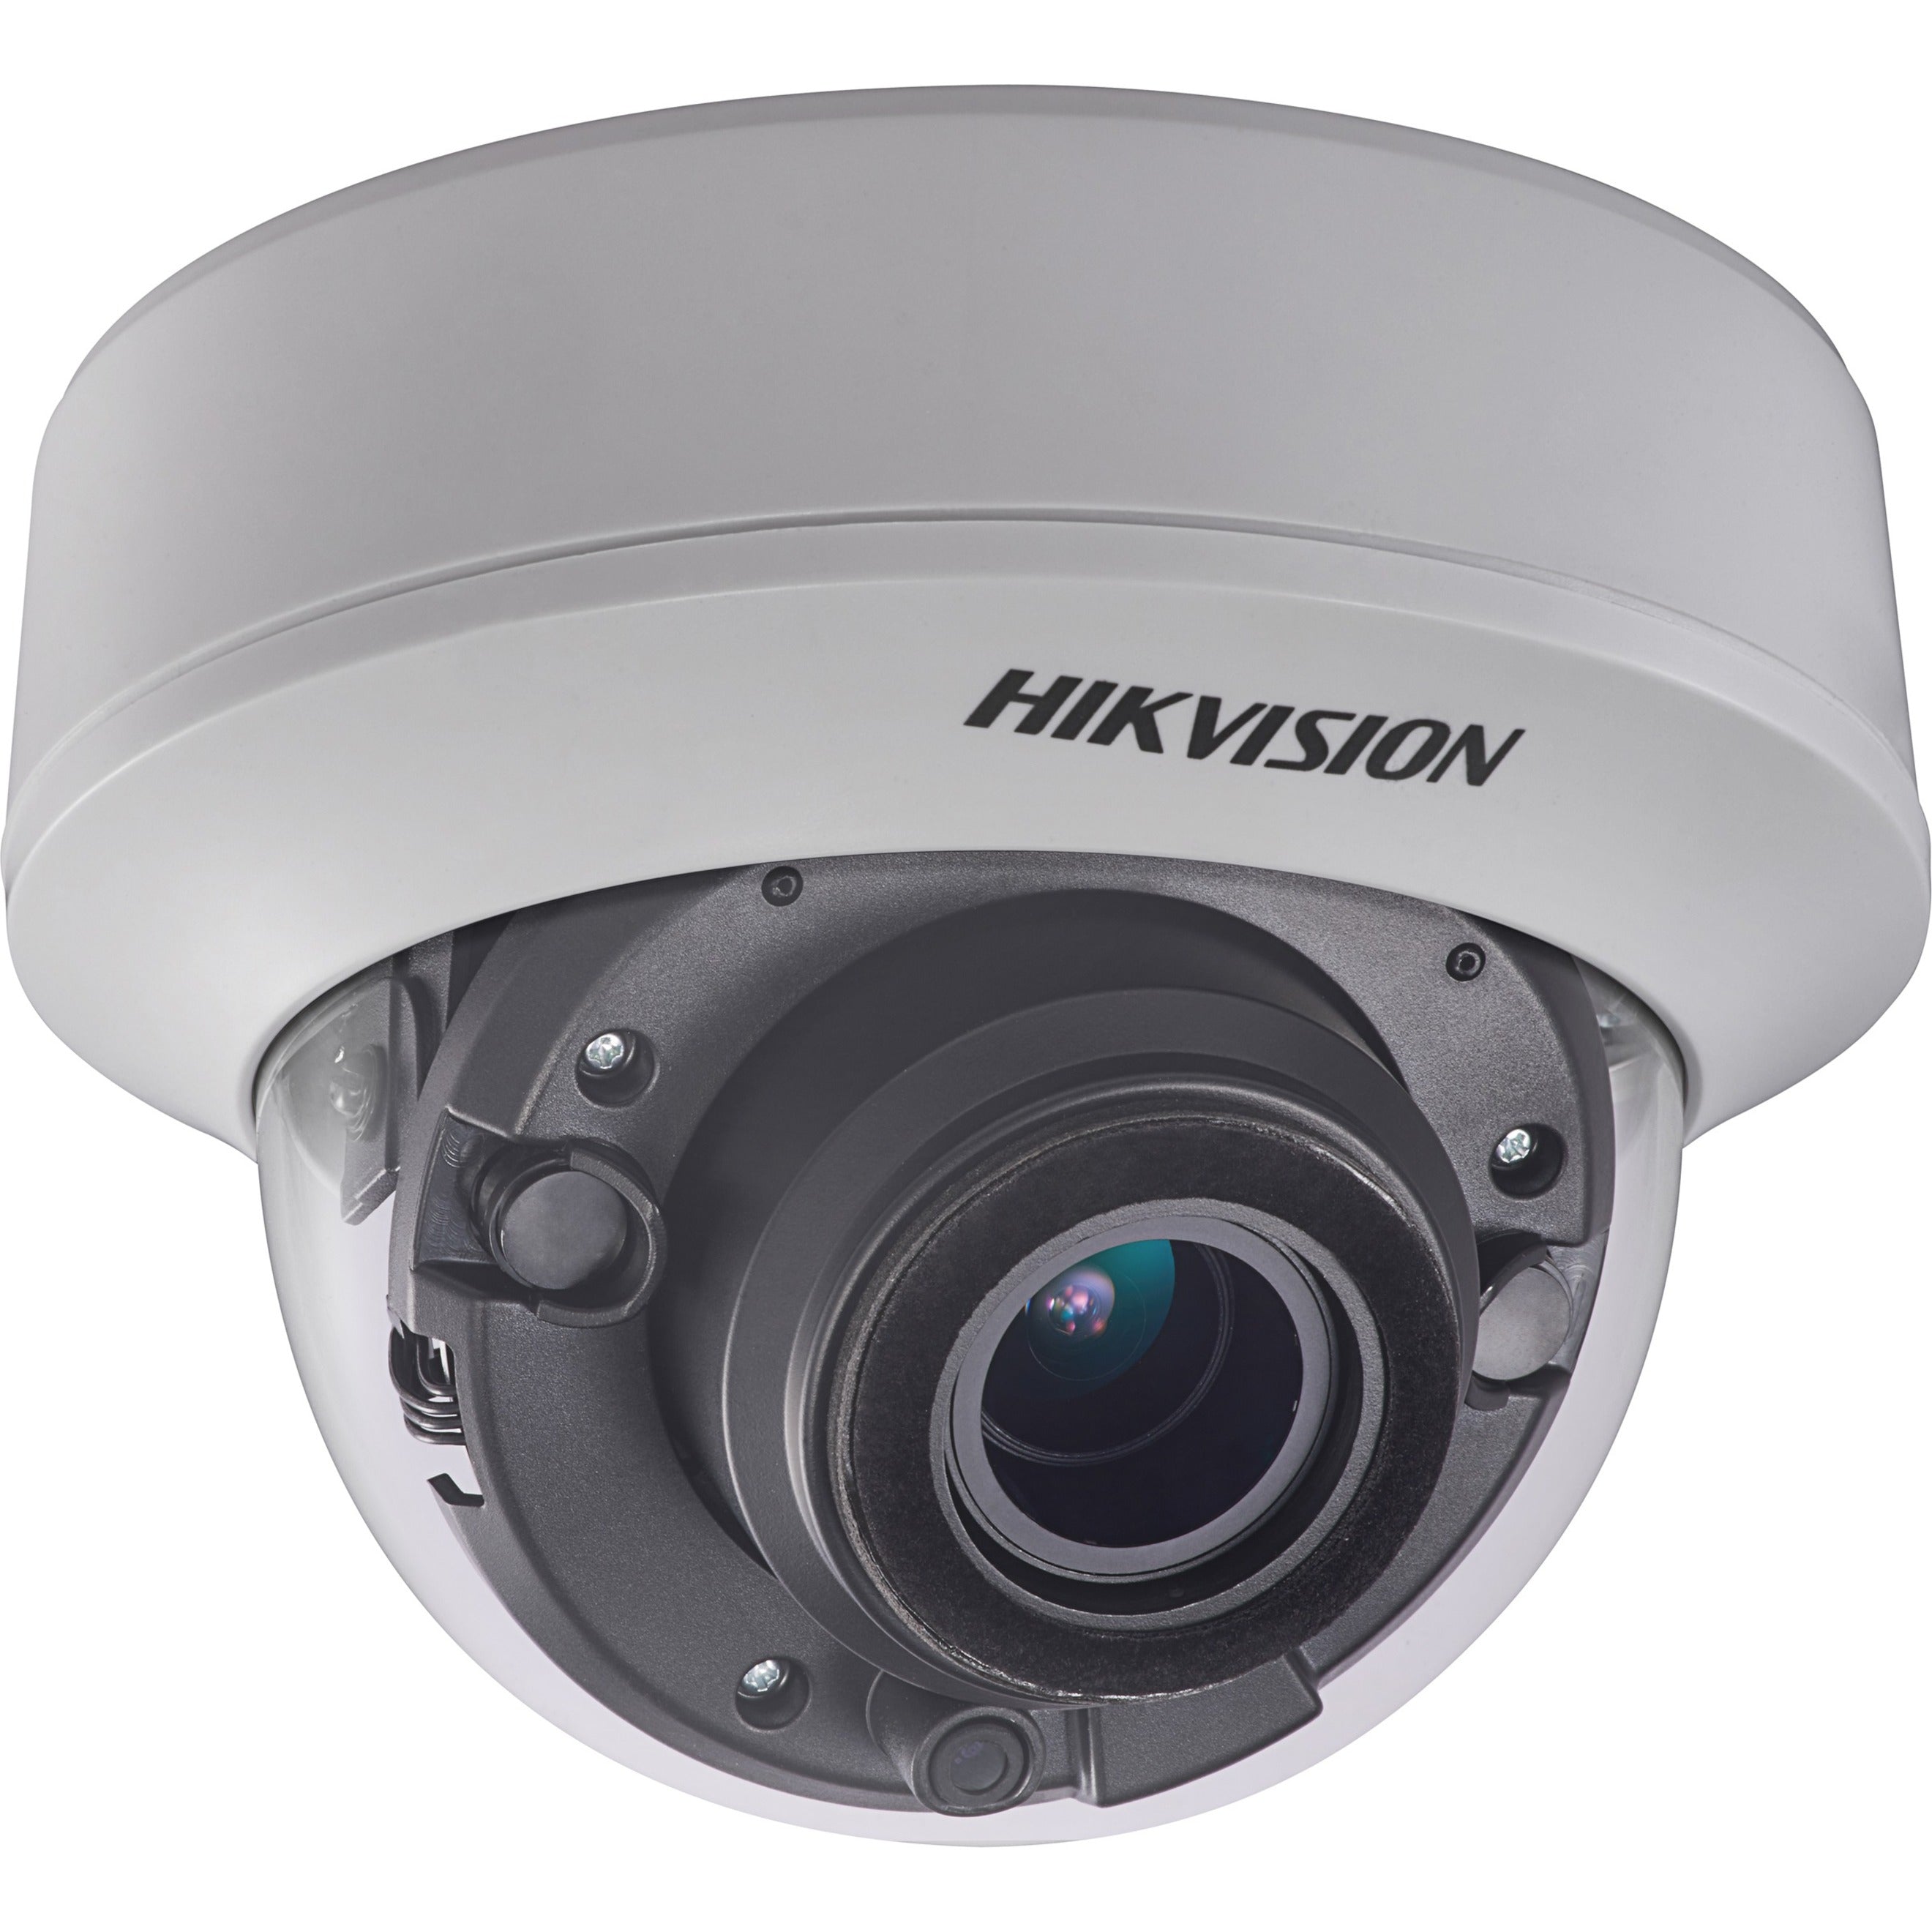 Hikvision DS-2CC52D9T-AITZE 2MP Ultra Low-Light PoC Dome Camera, 4.3x Zoom, Full HD, Indoor